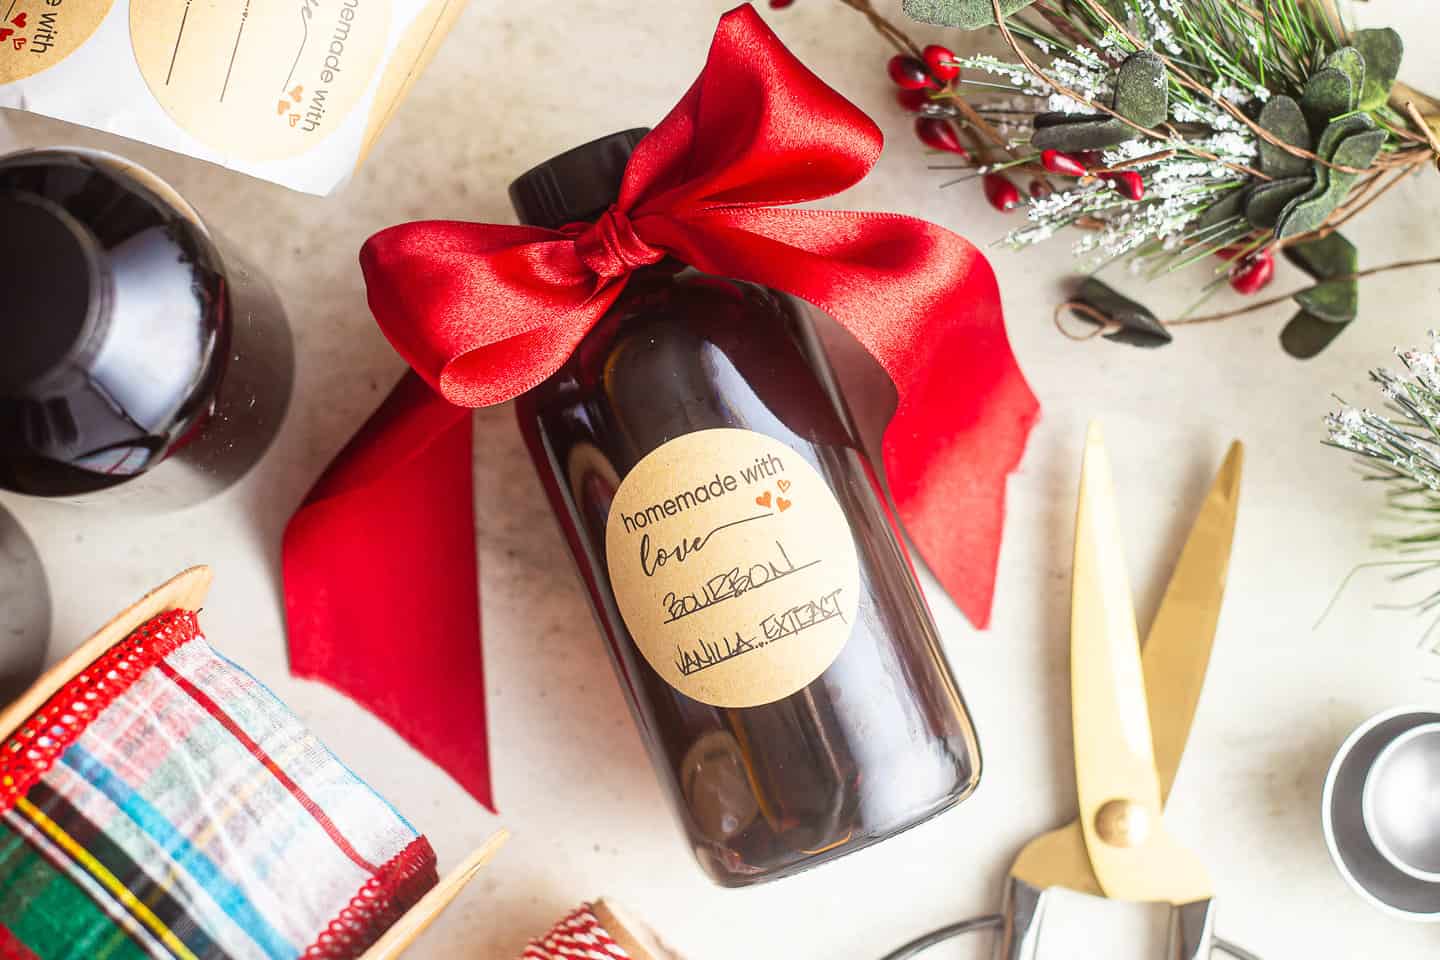 Vanilla extract recipe made and bottled with gift tag and ribbon.